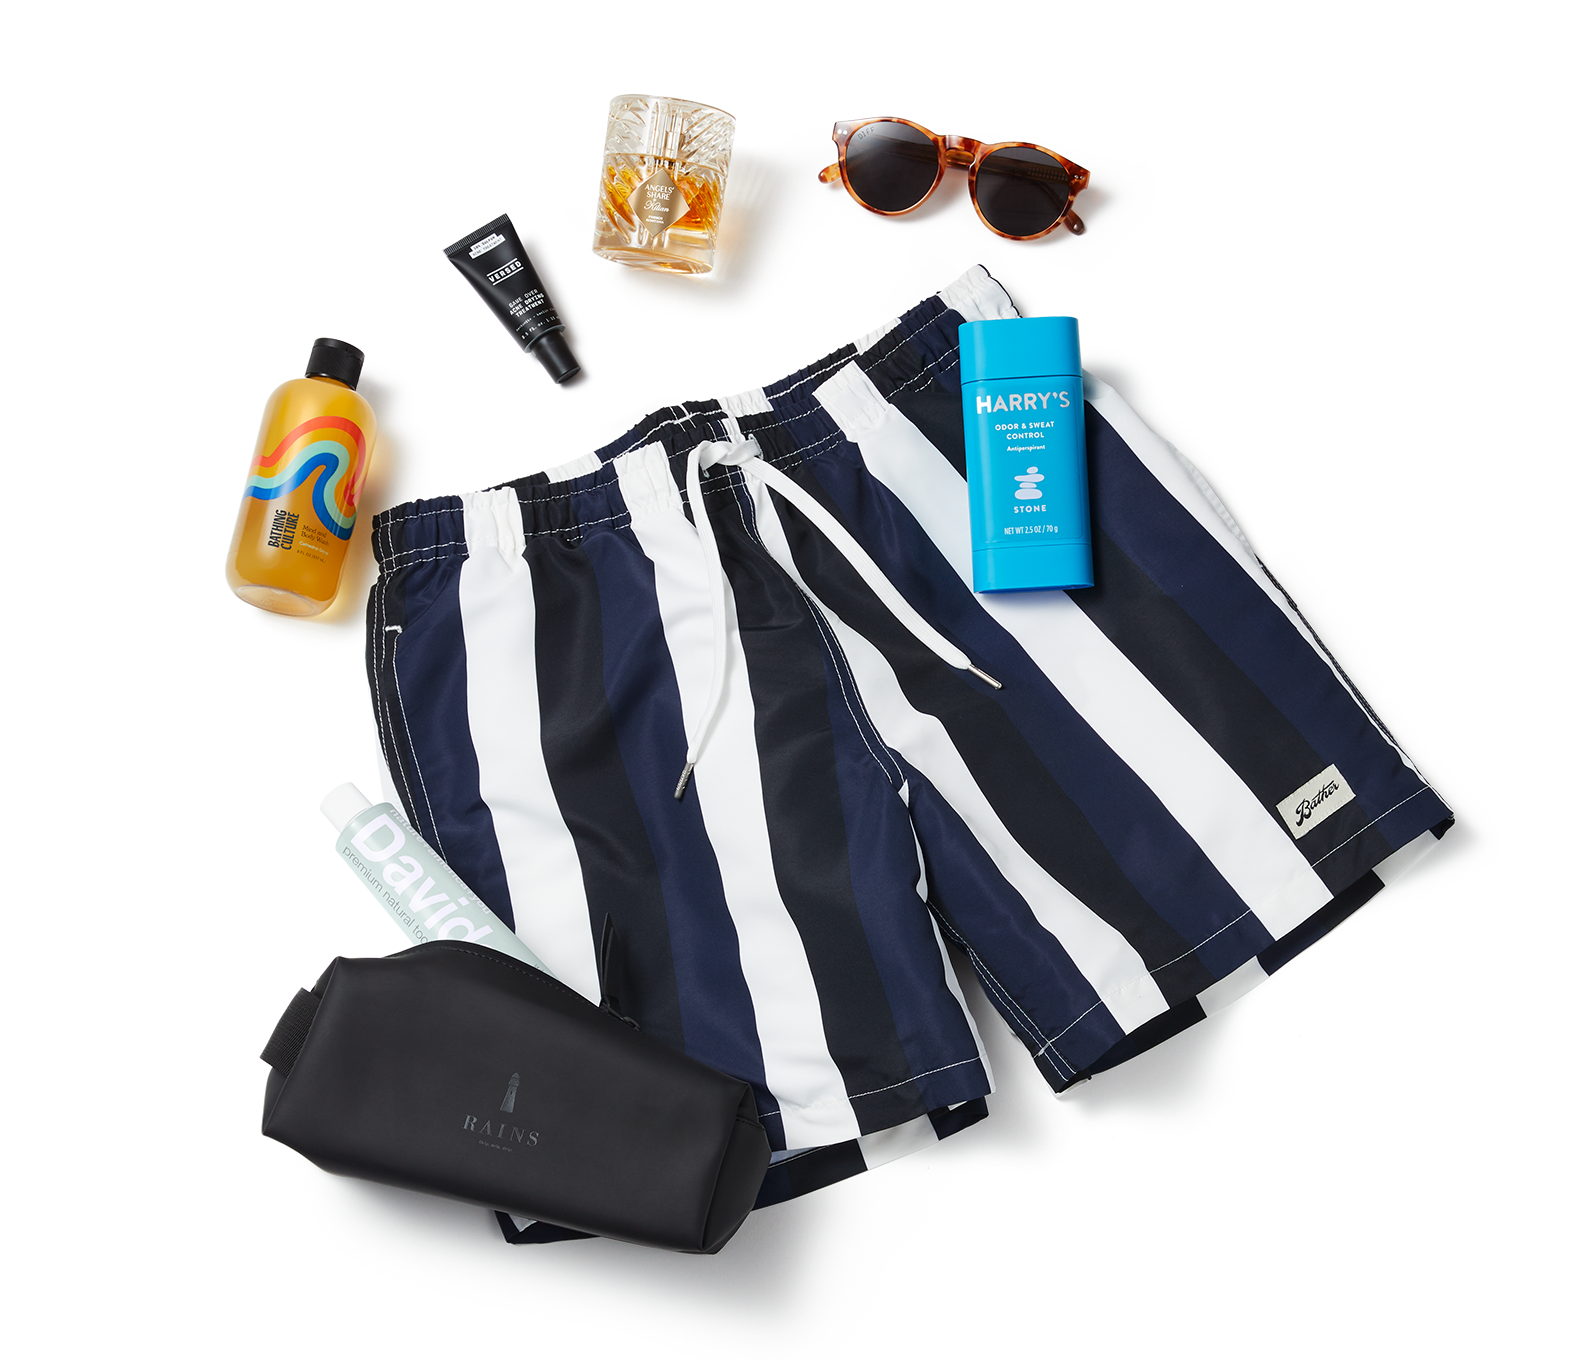 Pair of dark blue and white striped shorts, sunglasses and various makeup products.